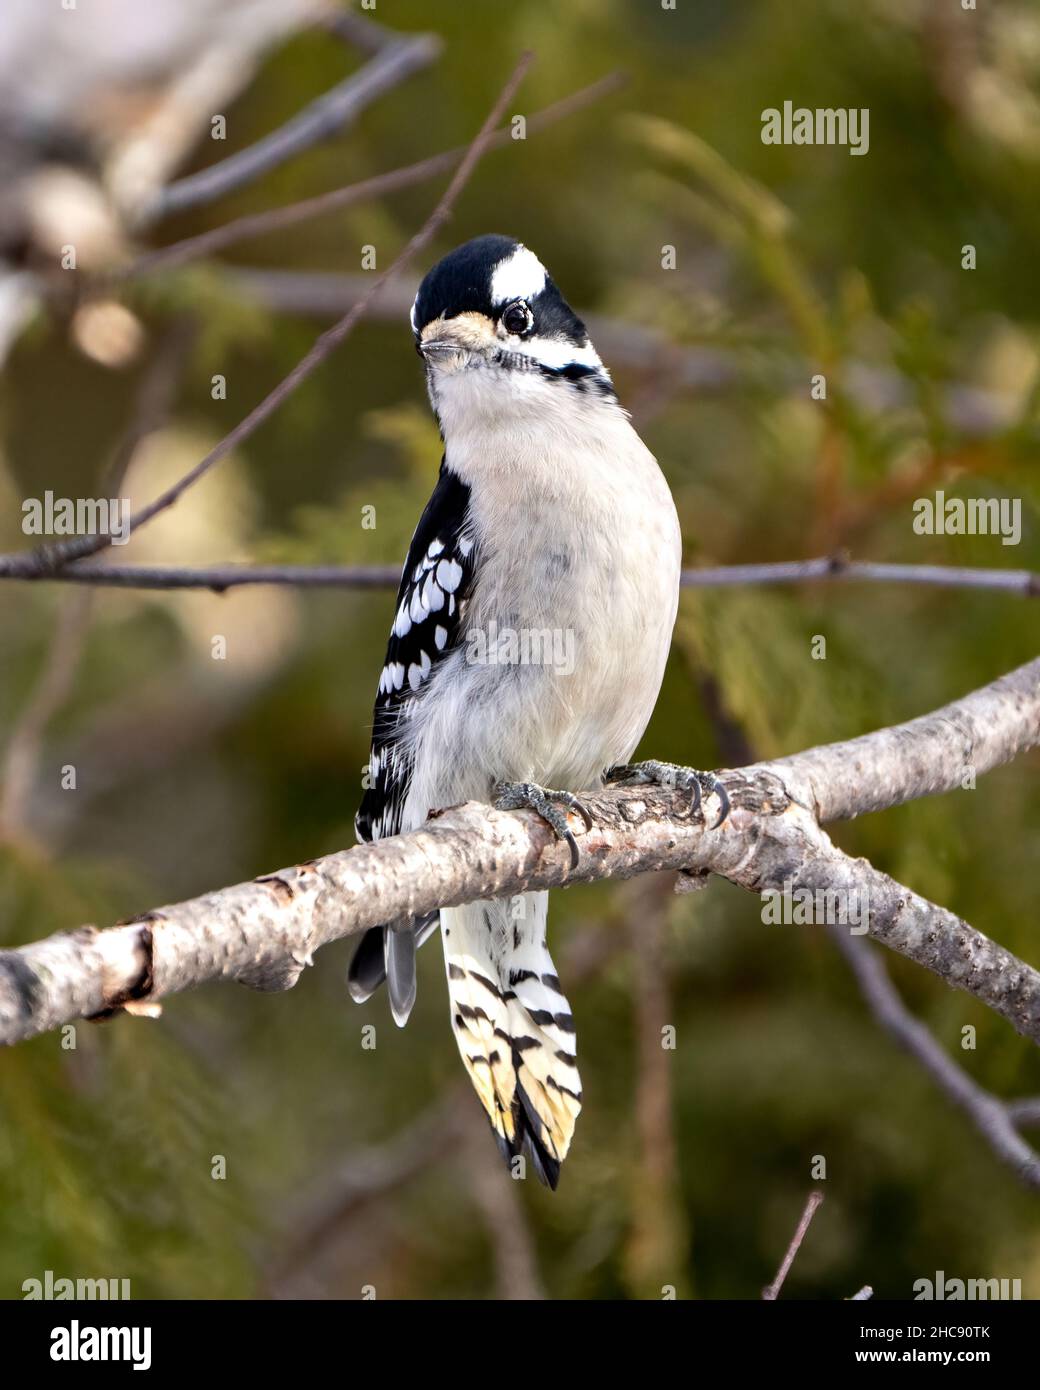 Woodpecker perched on a tree branch with a blur background in its environment and habitat surrounding, displaying white and black feather plumage wing Stock Photo